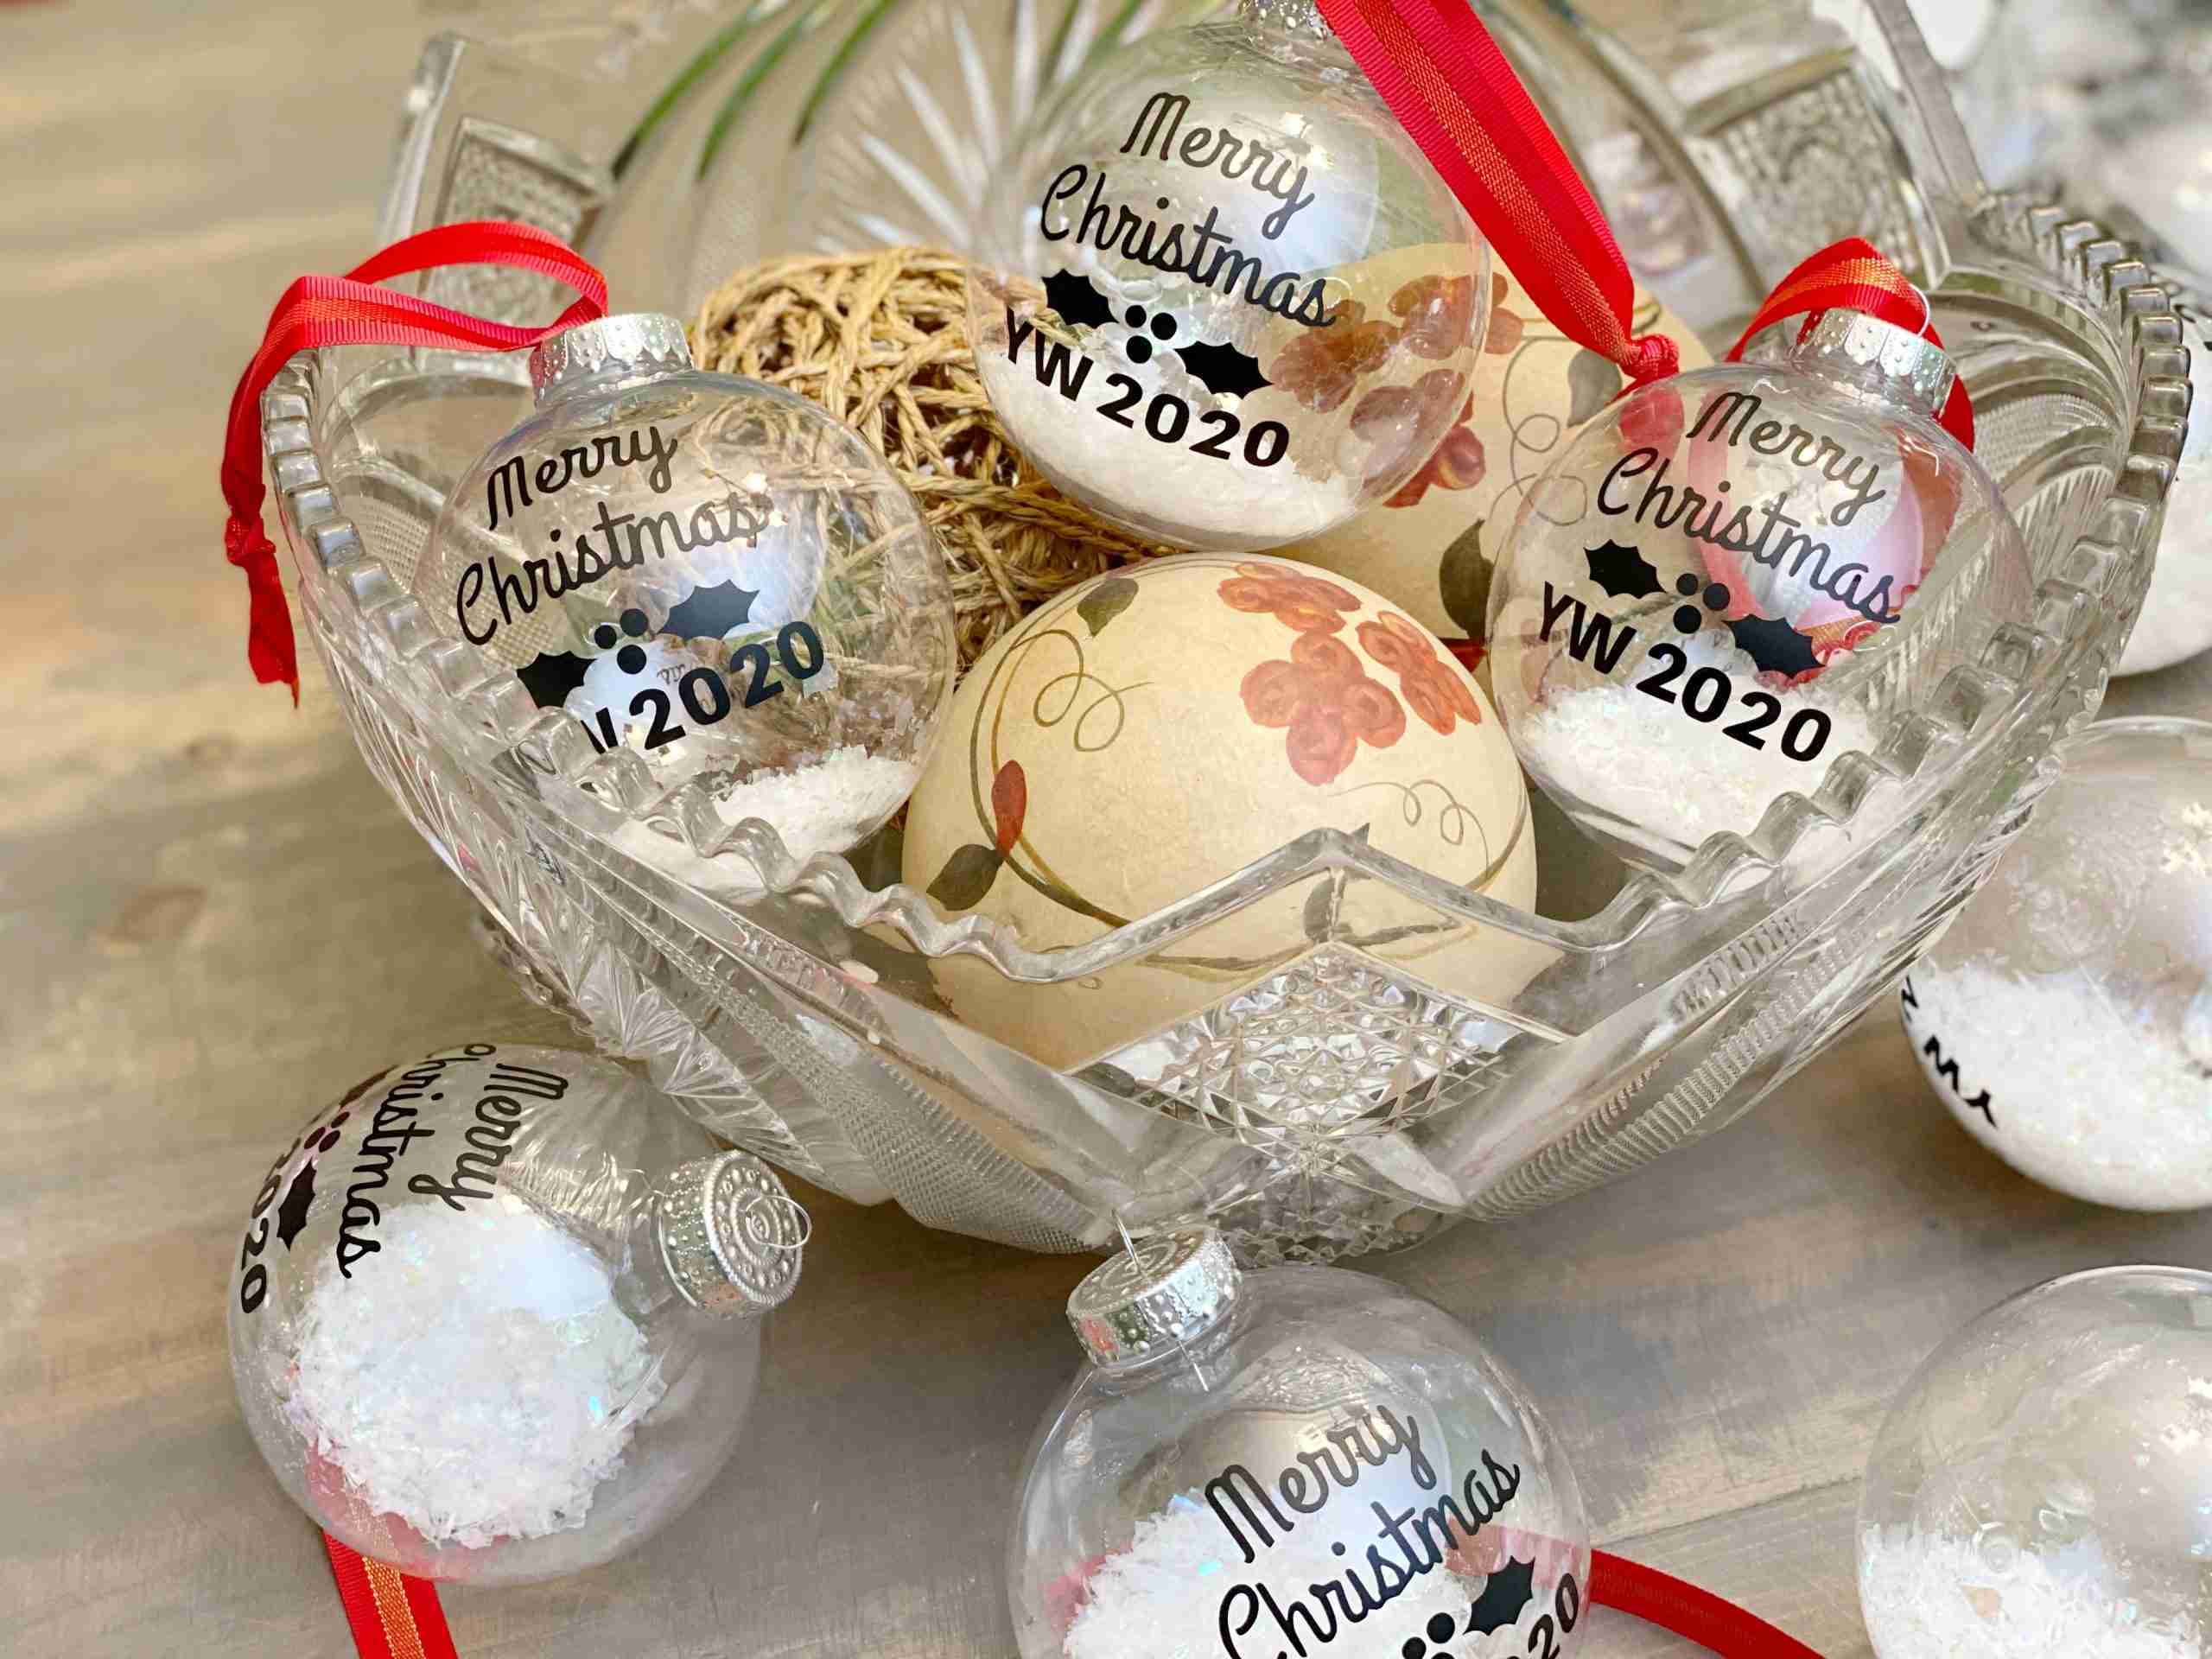 easy to make yw christmas ornament, diy christmas ornaments, clear plastic ball ornaments, merry christmas svg file, free svg file, vintage punch bowl, antique crystal punch bowl